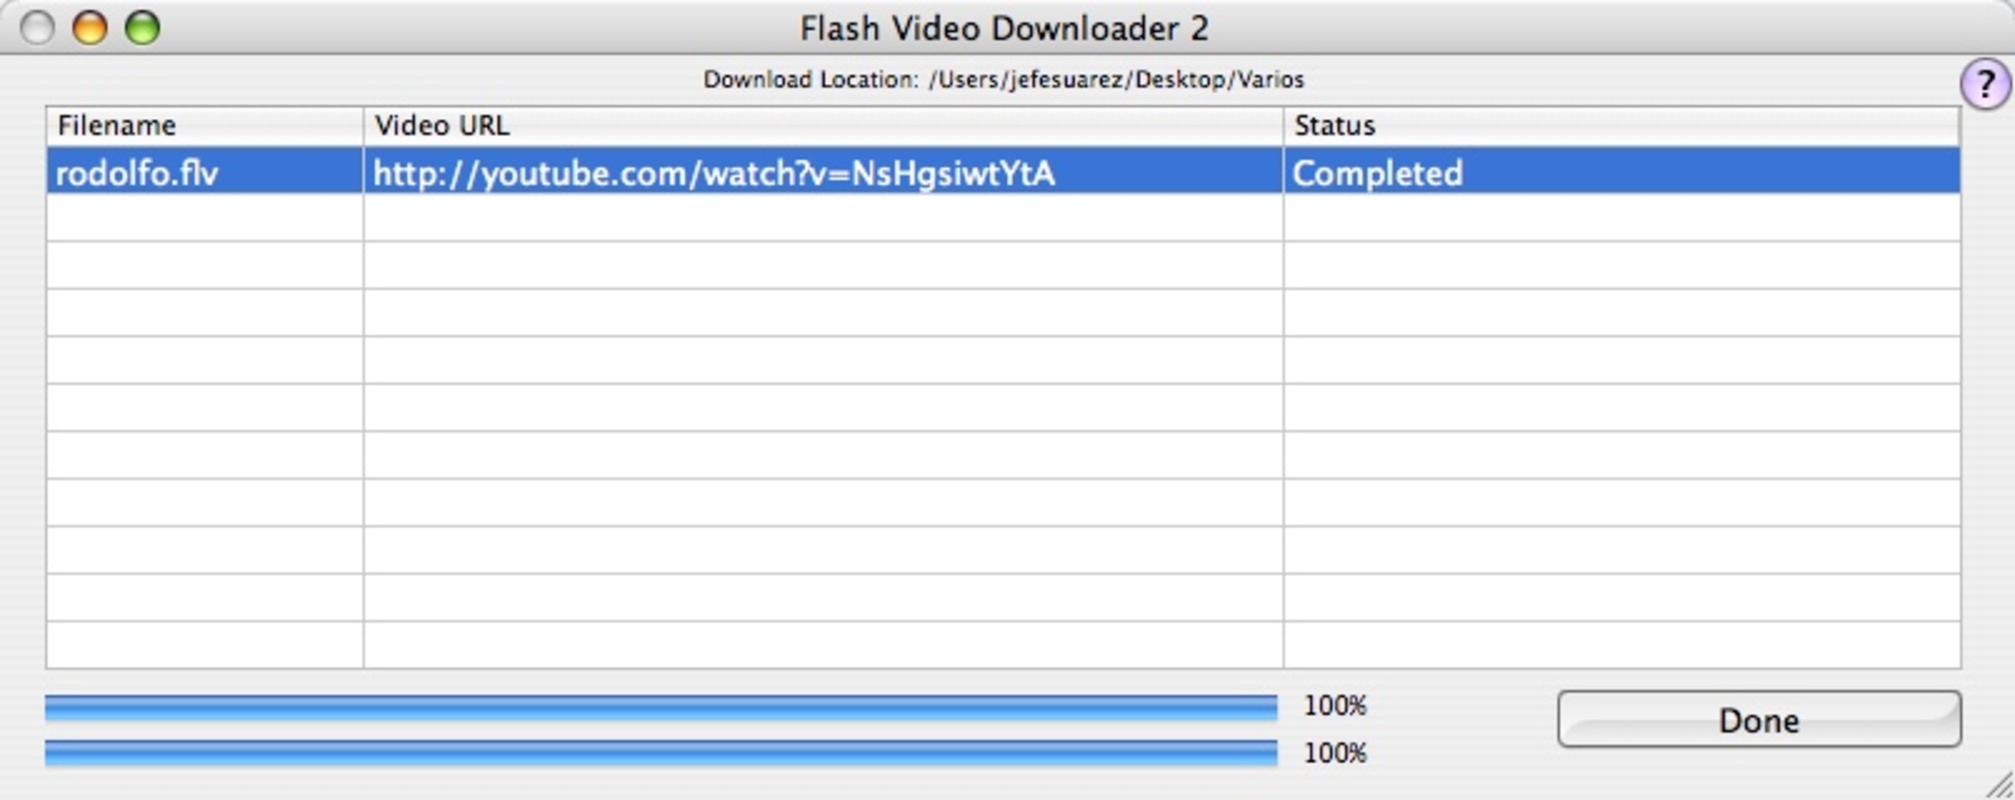 Flash Video Downloader 2.1.3 feature